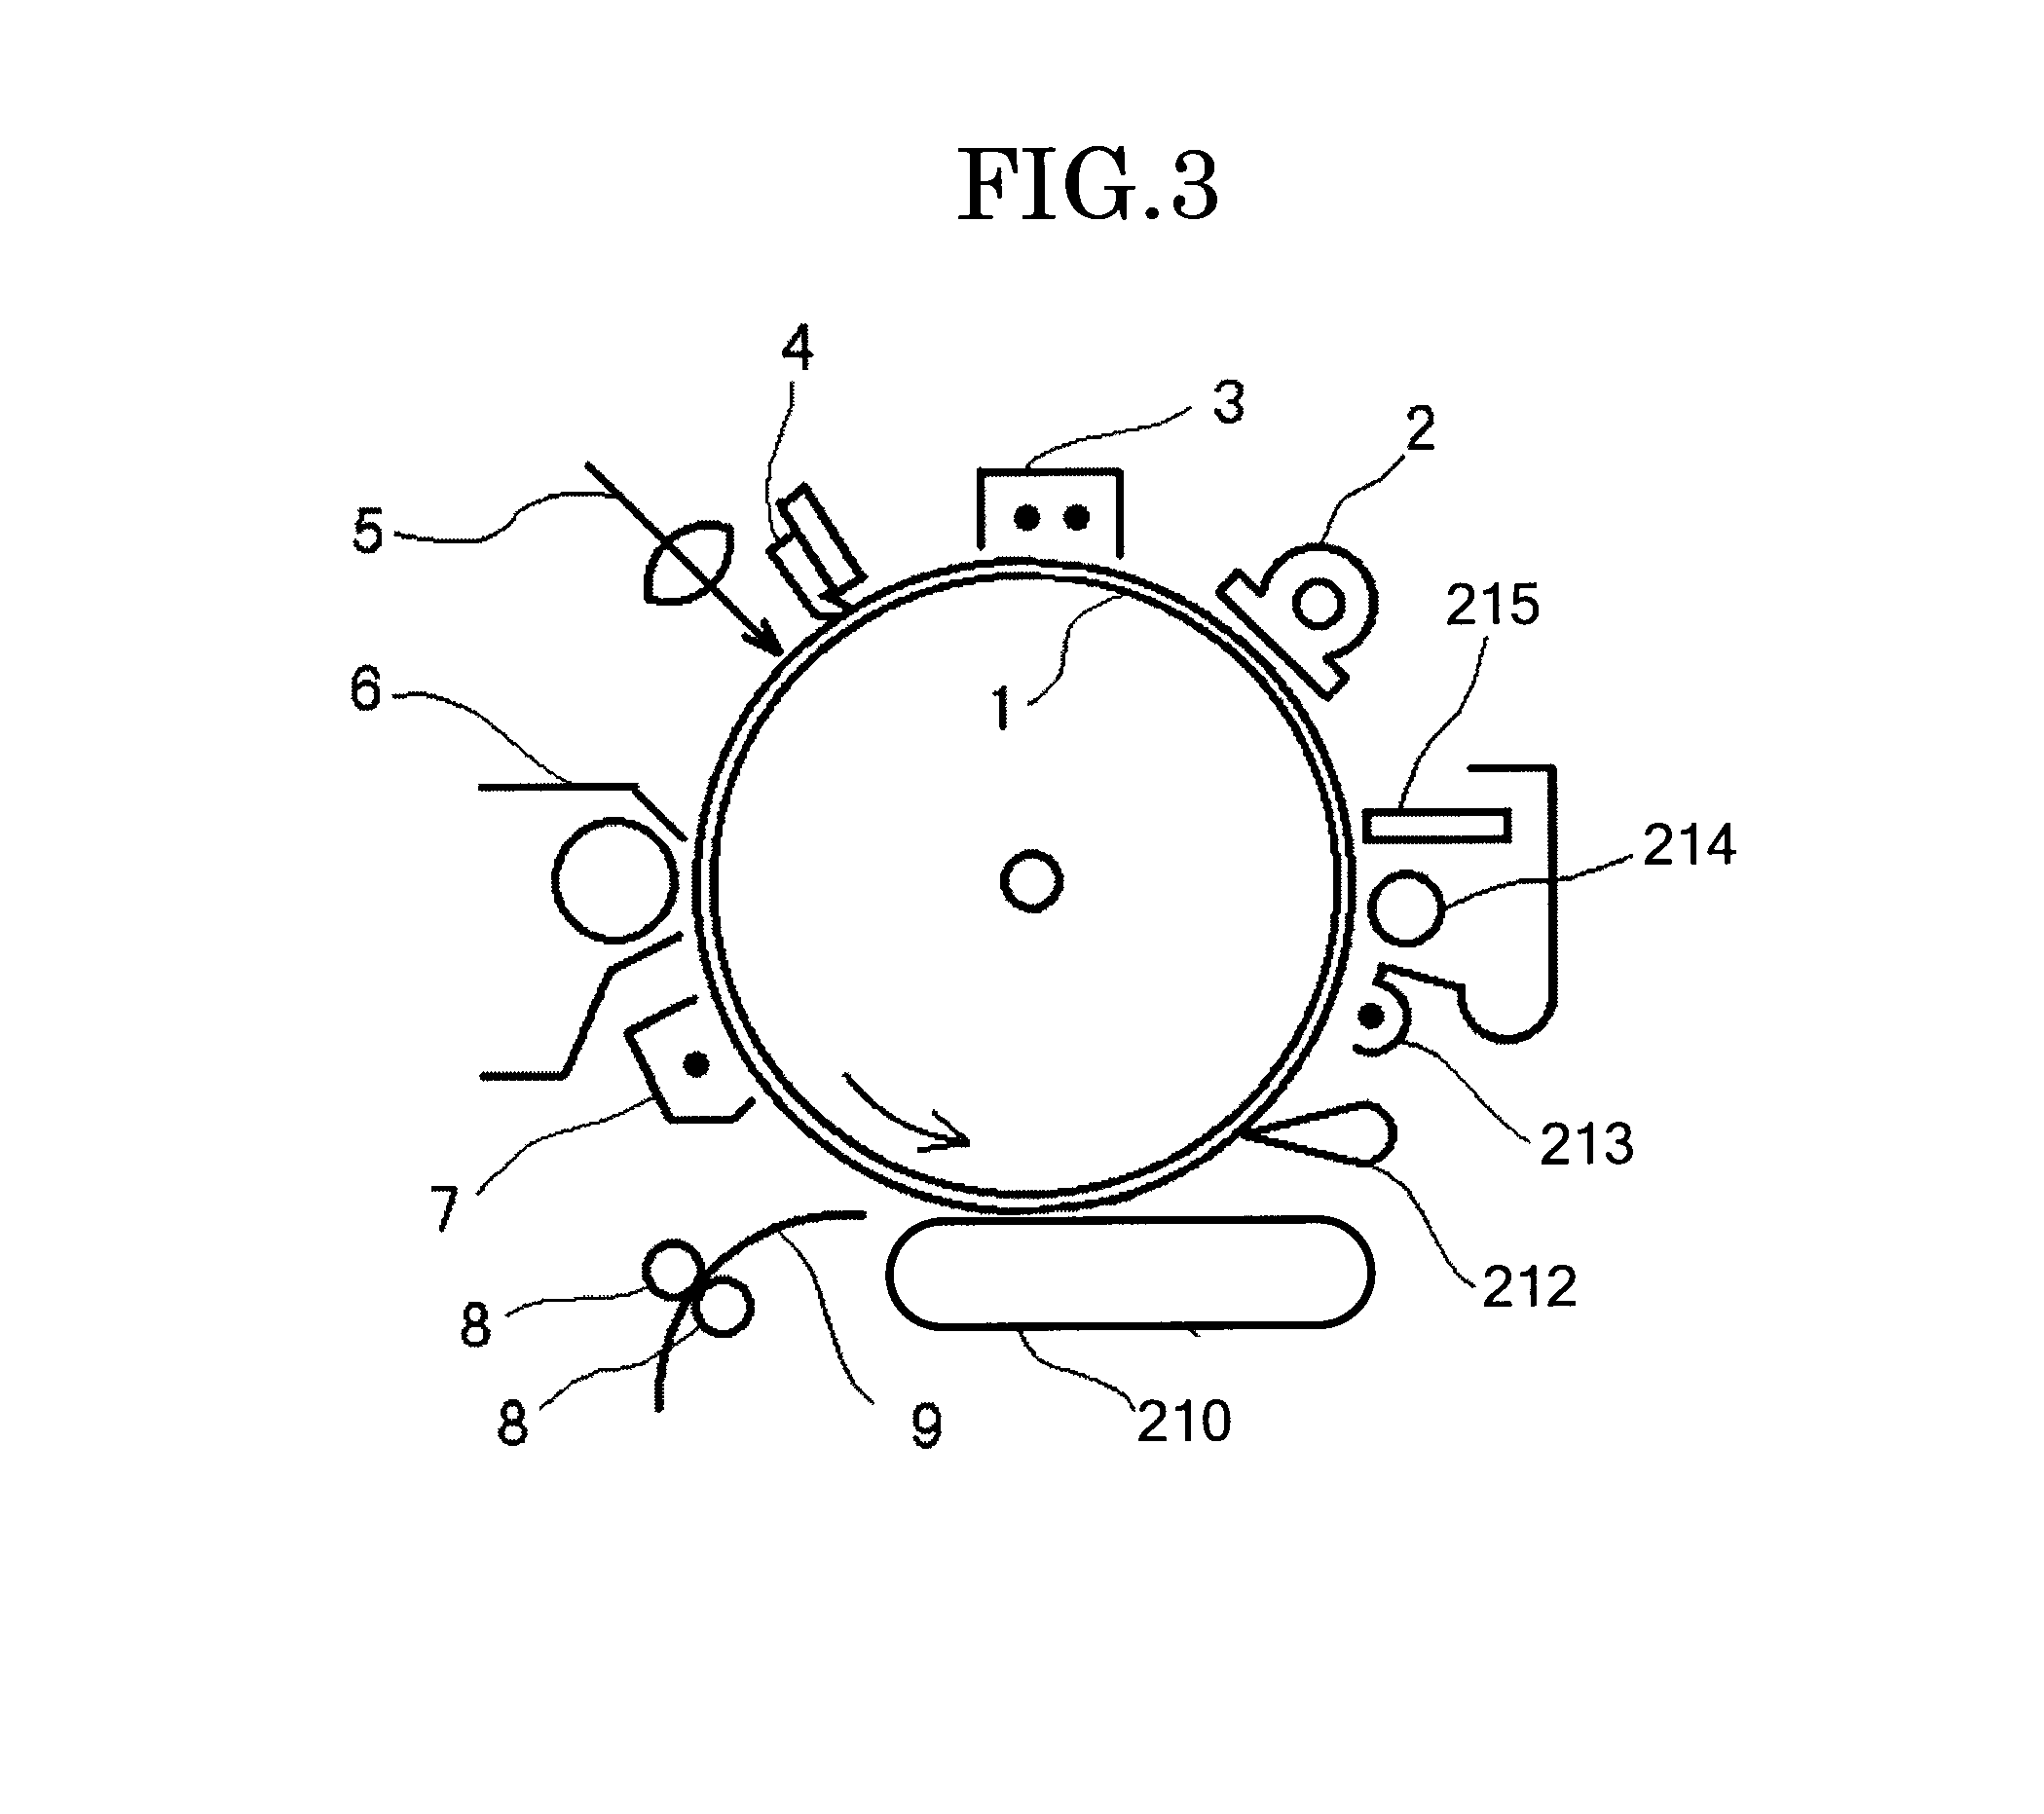 Image forming apparatus, image forming method, and process cartridge